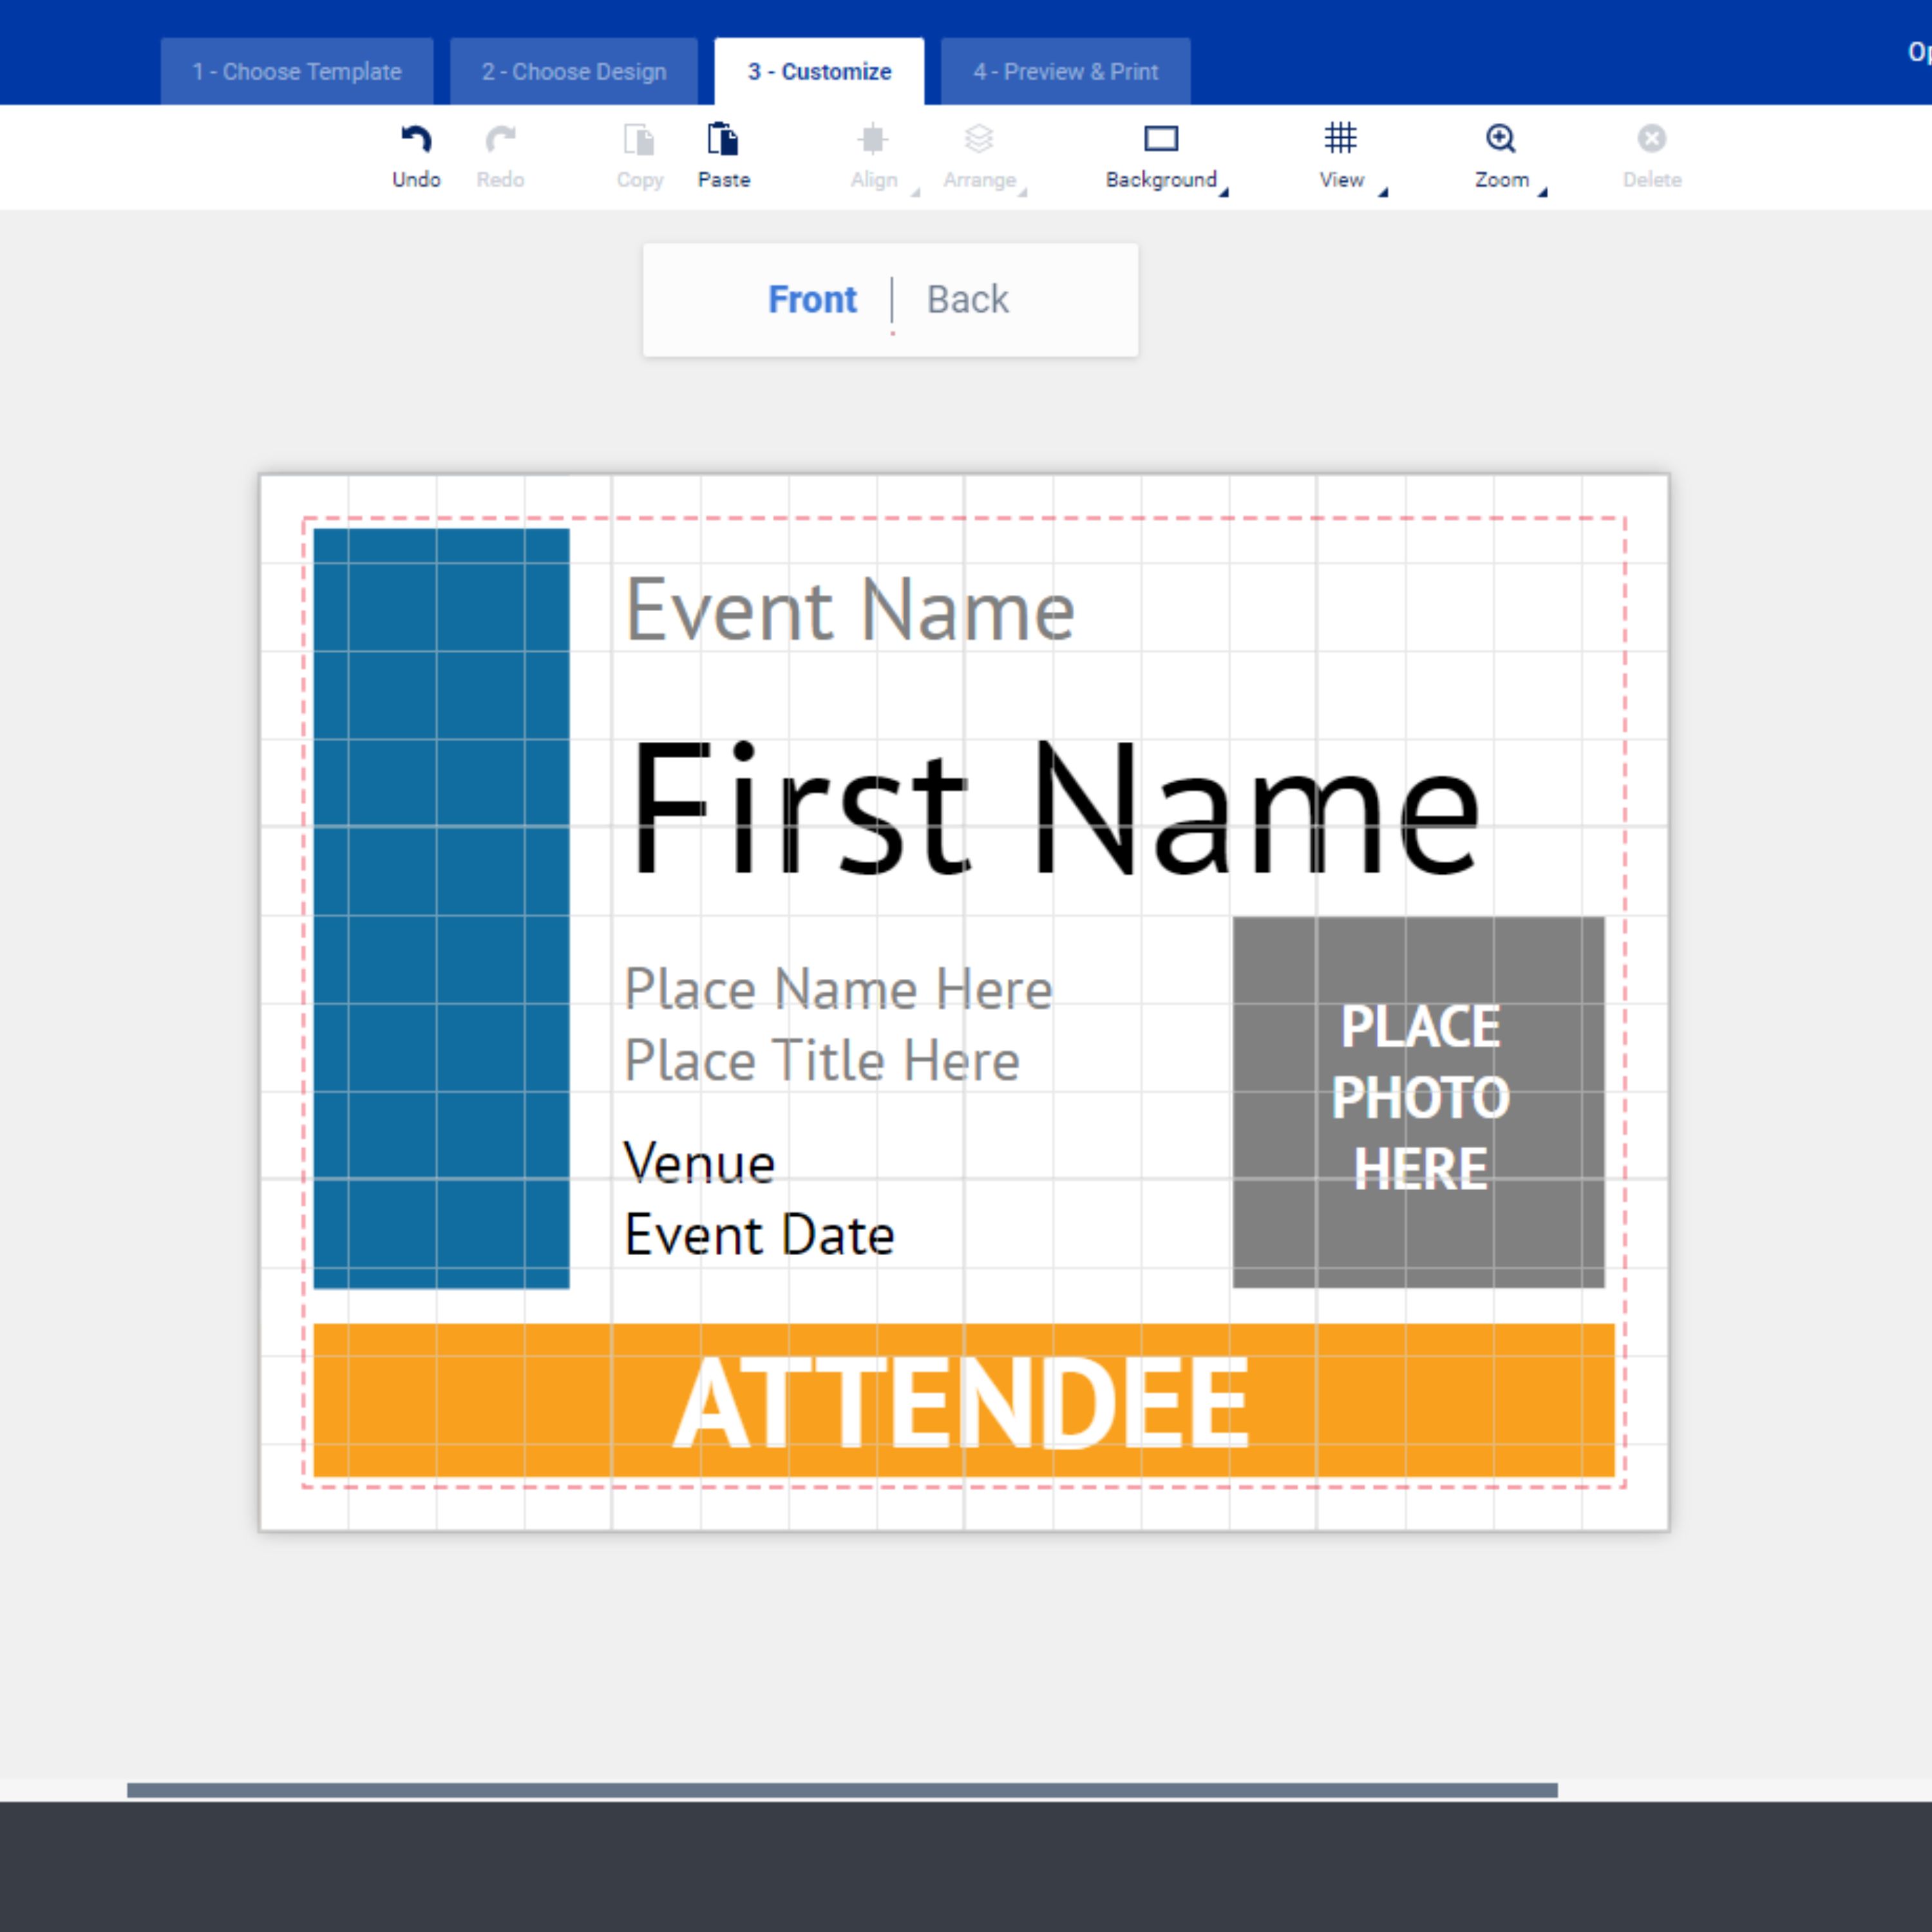 Free Avery template for an event employee ID badge. The image is a screenshot of Avery Design and Print Online showing the template in the editor screen.
